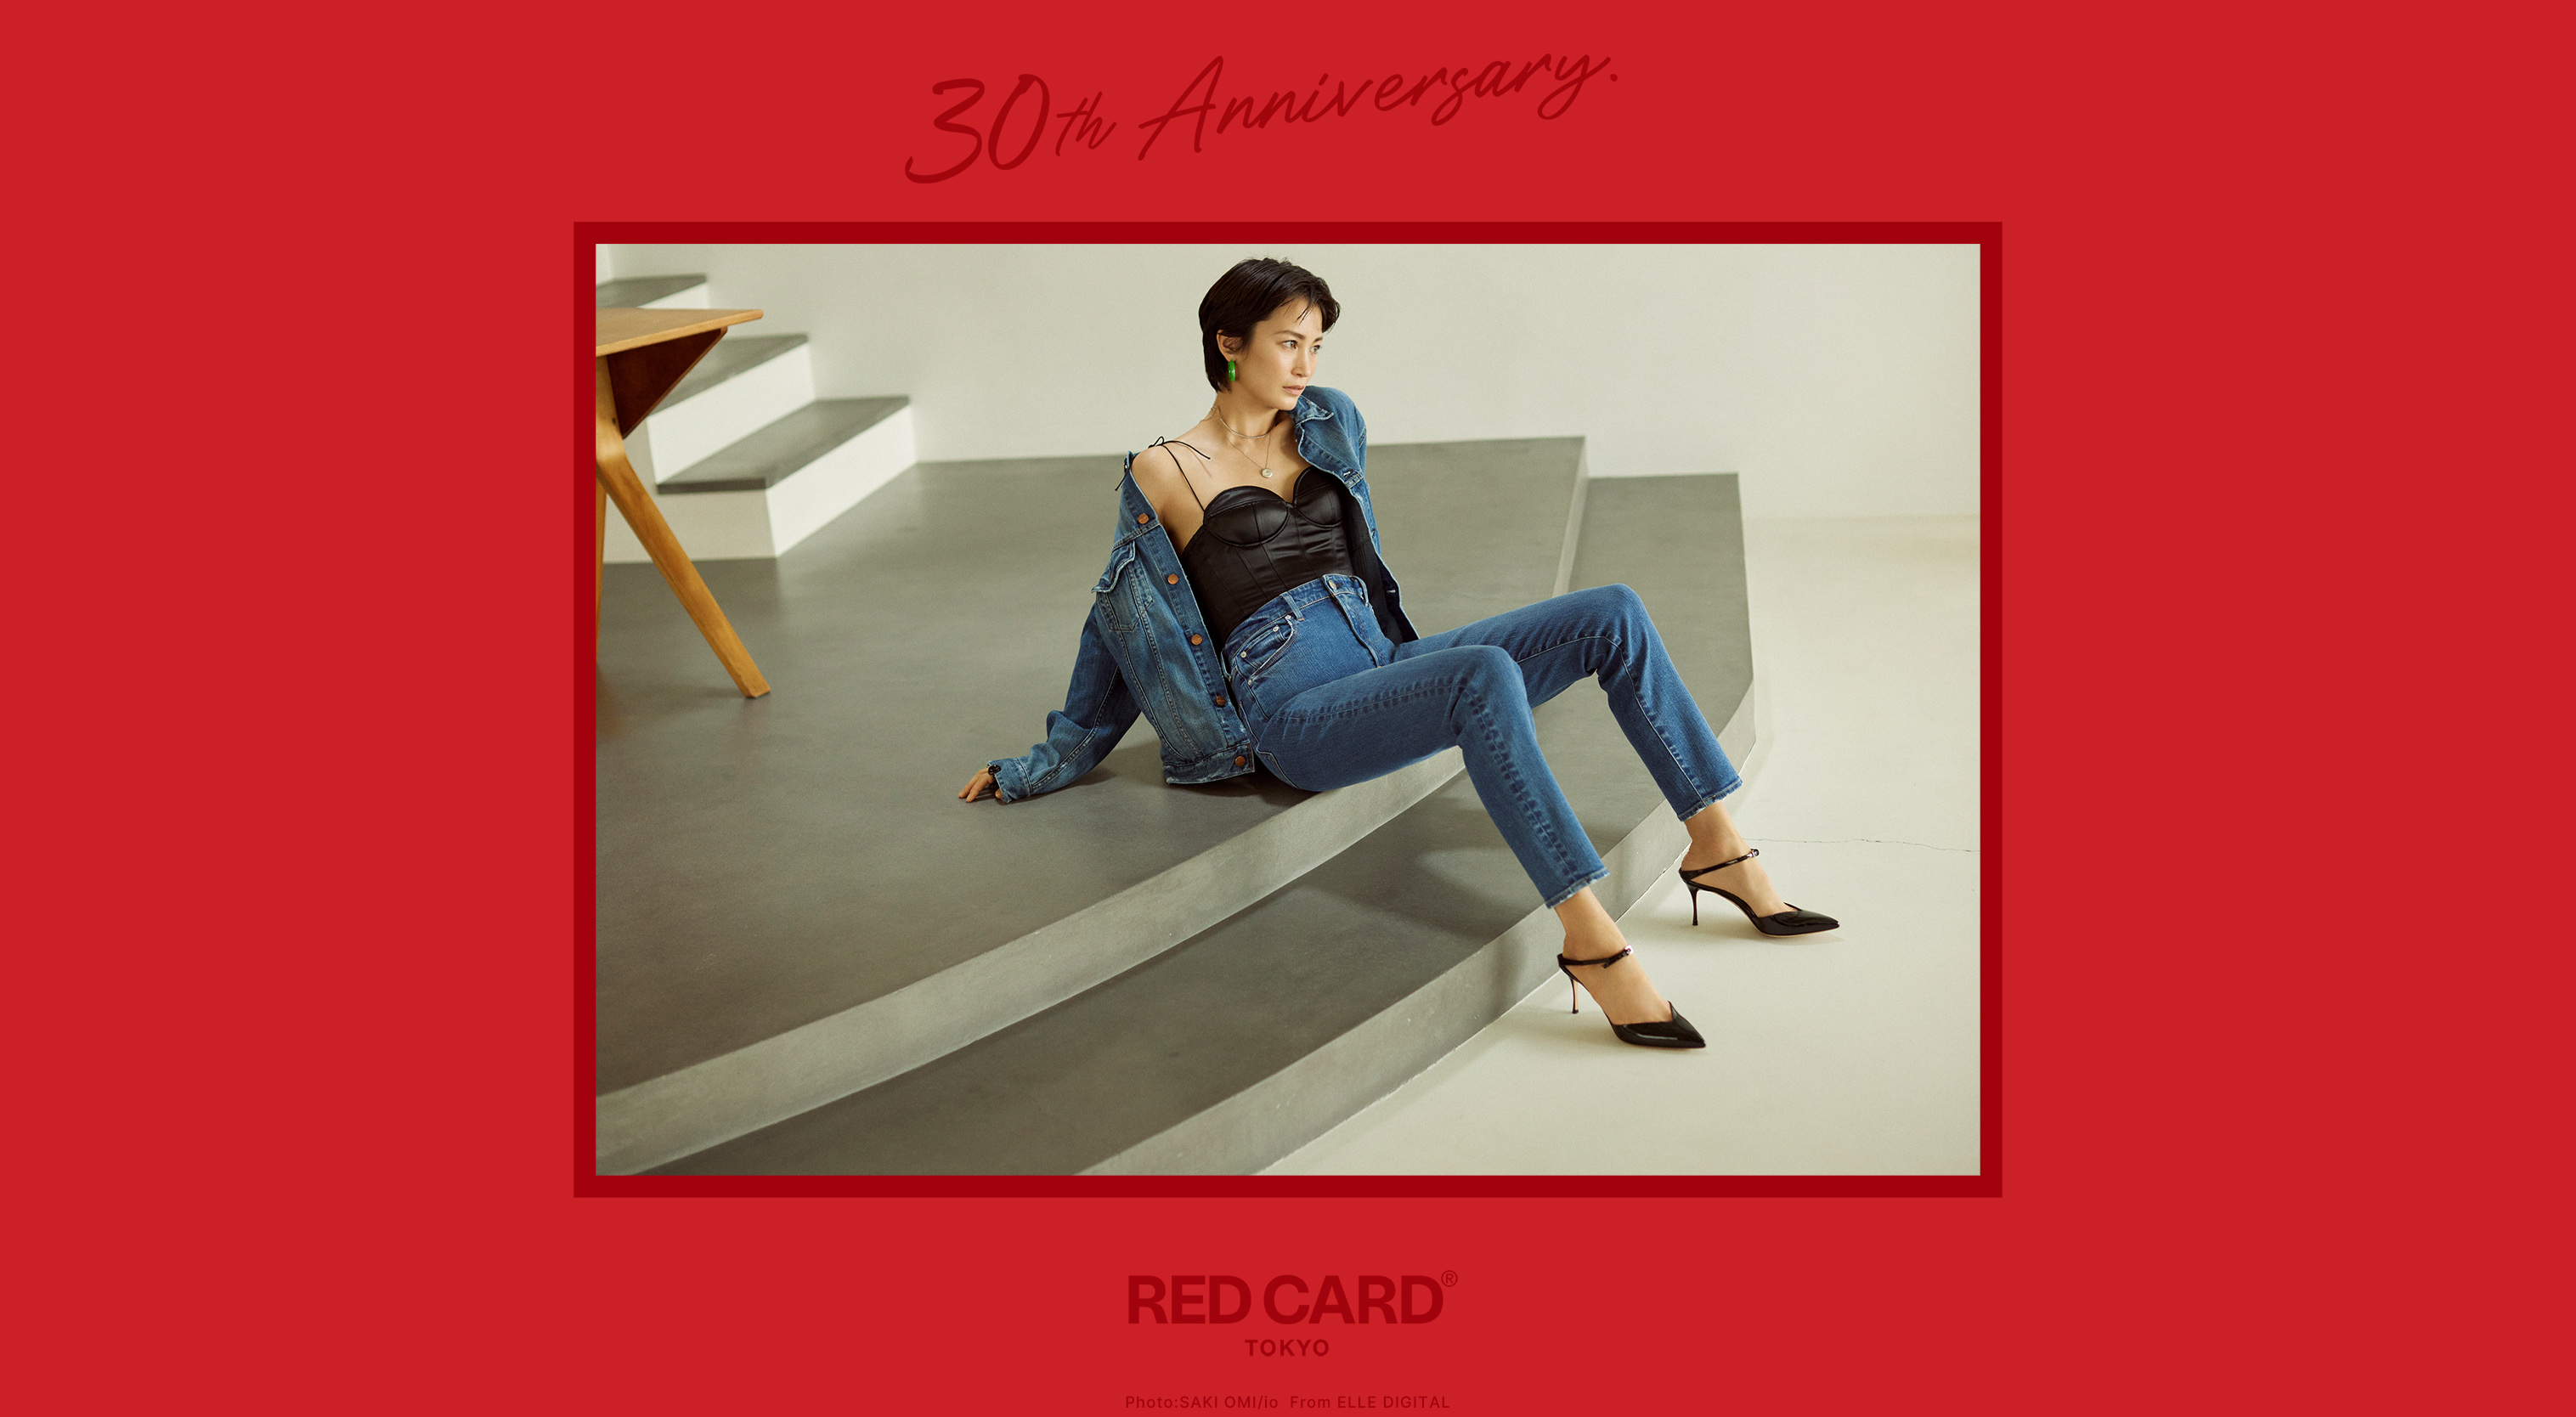 RED CARD TOKYO「30th Anniversary」